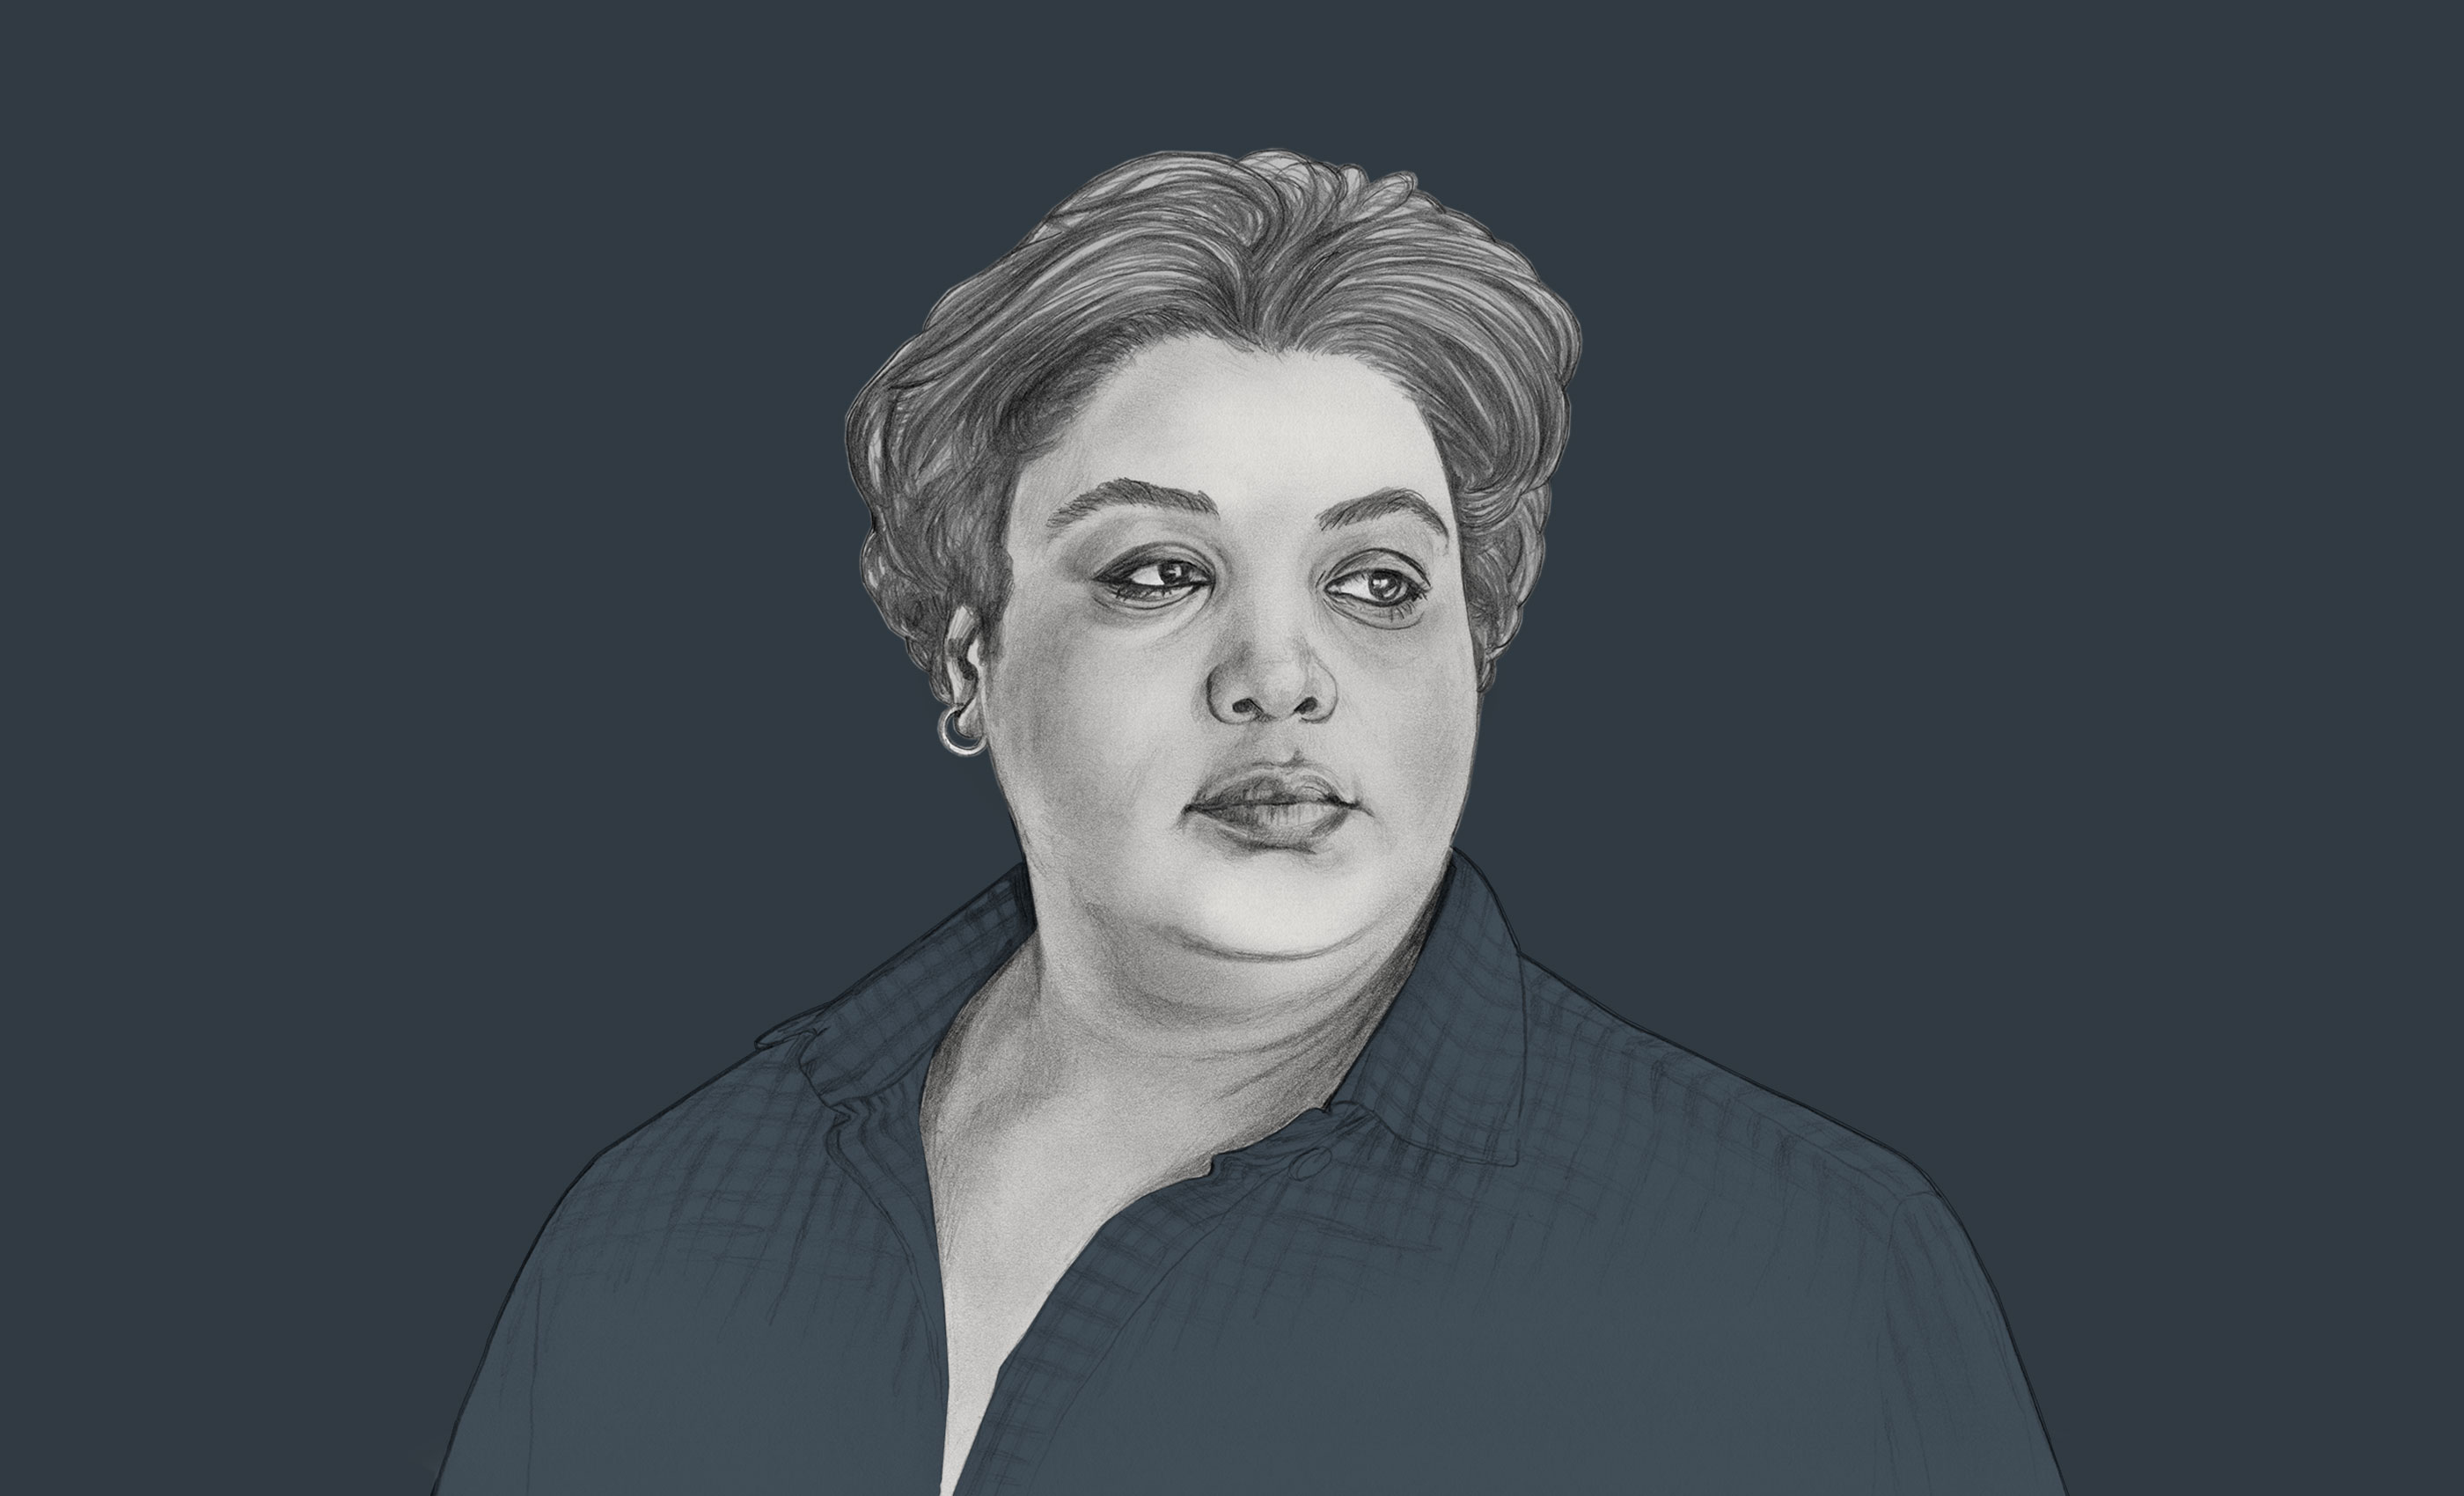 roxane gay hunger quotes with quotation